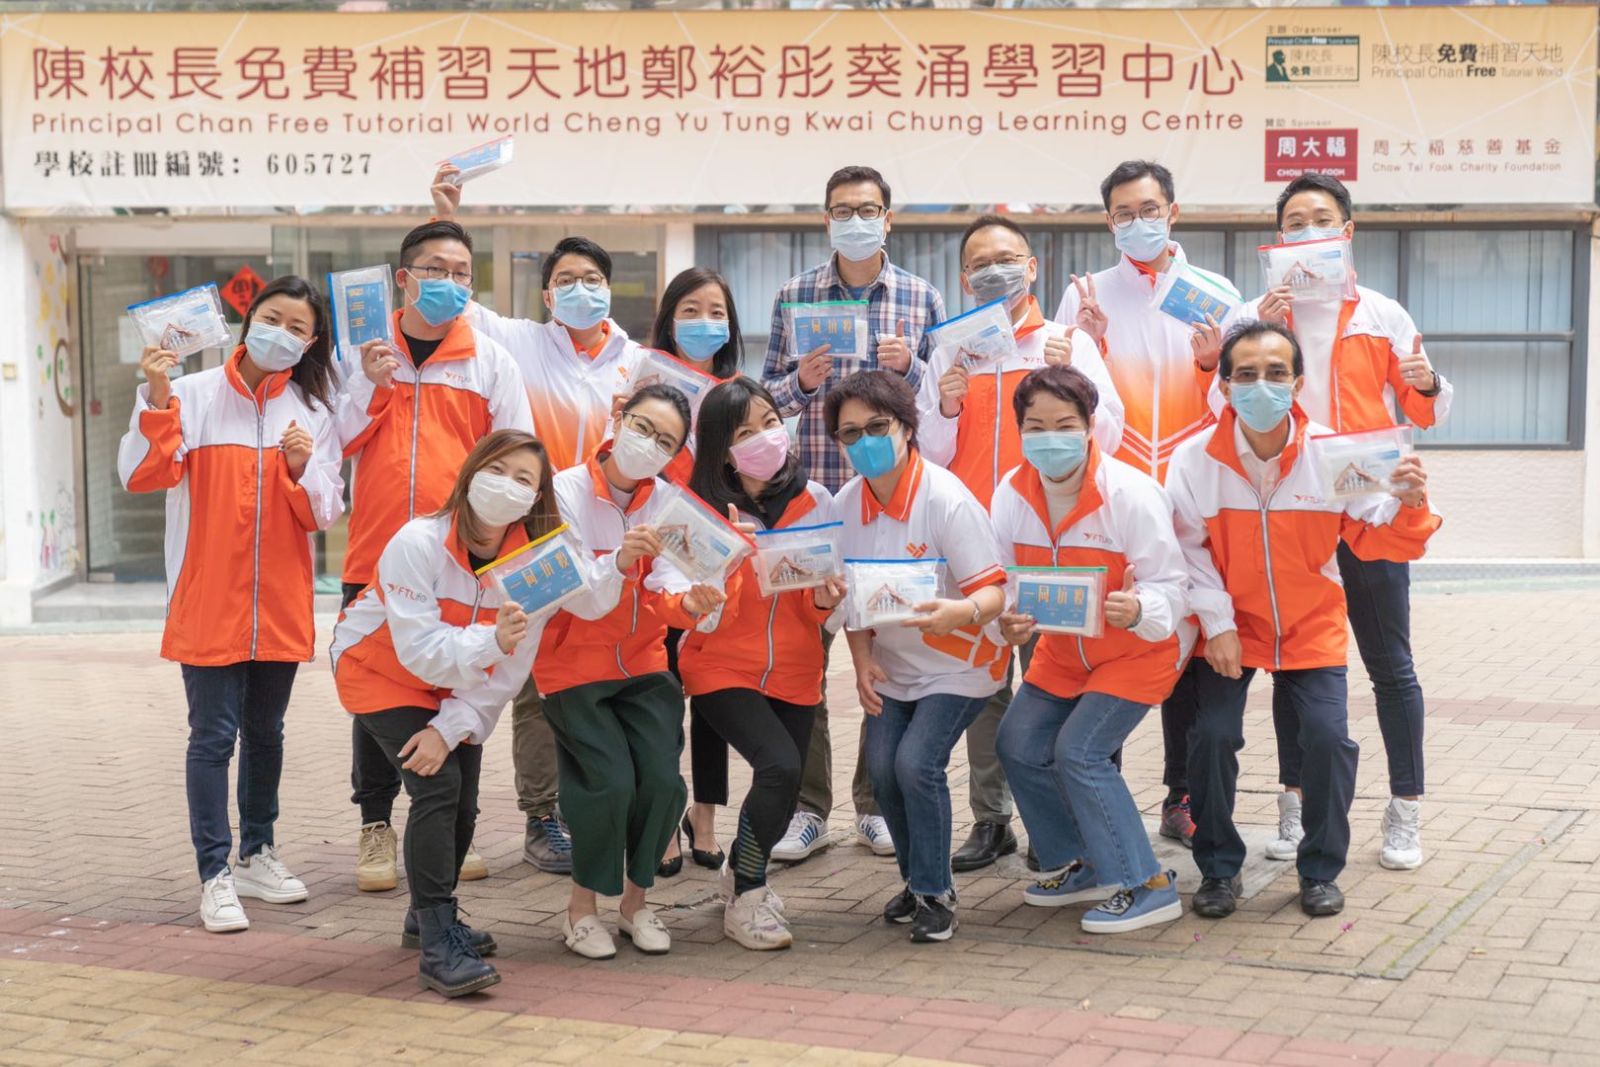 【FTLife donates the New World Group’s Epidemic-Prevention Equipment to Principal Chan】